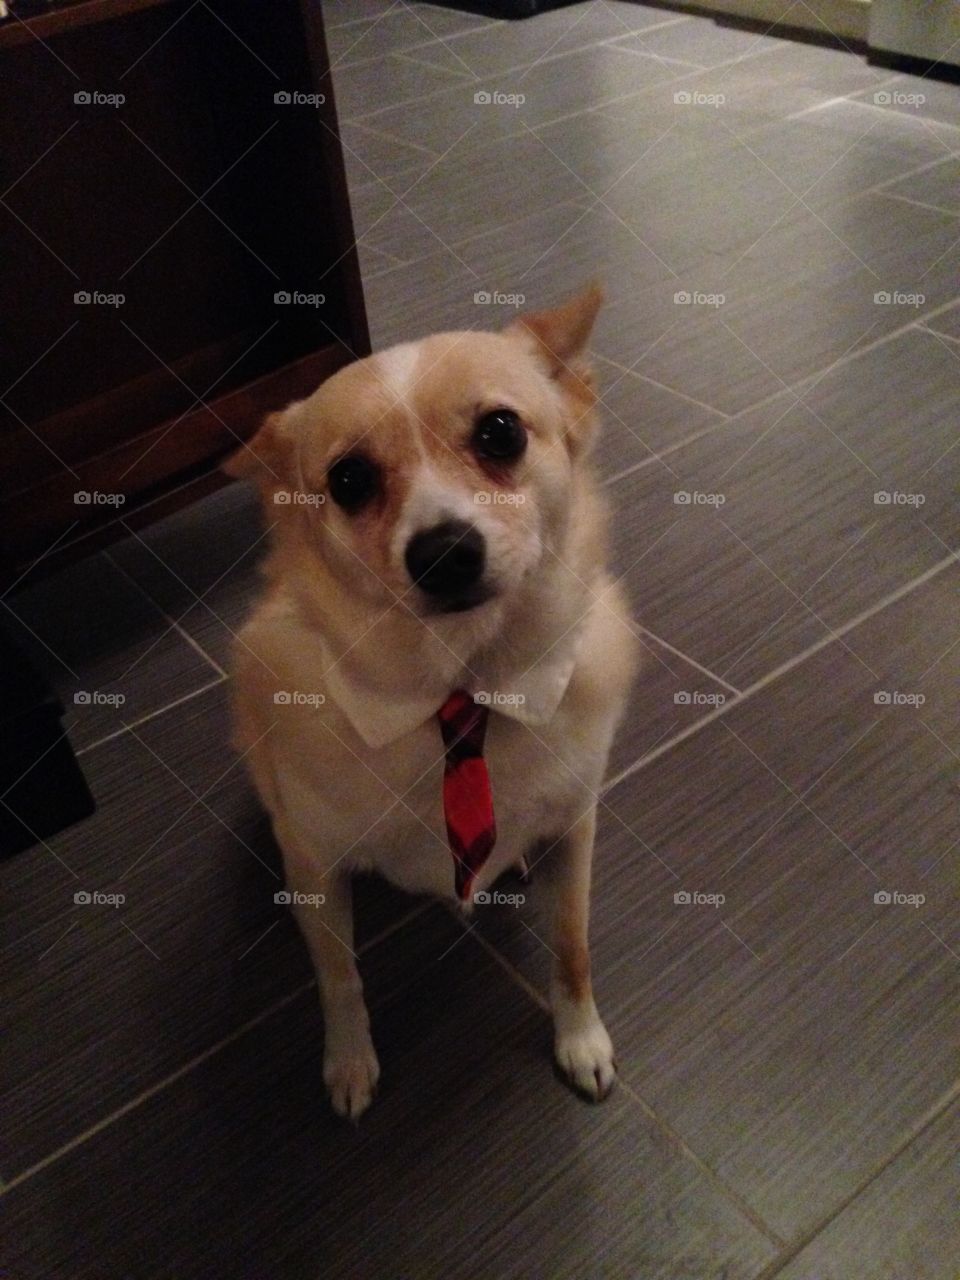 Max. Max the dog wearing a tie 